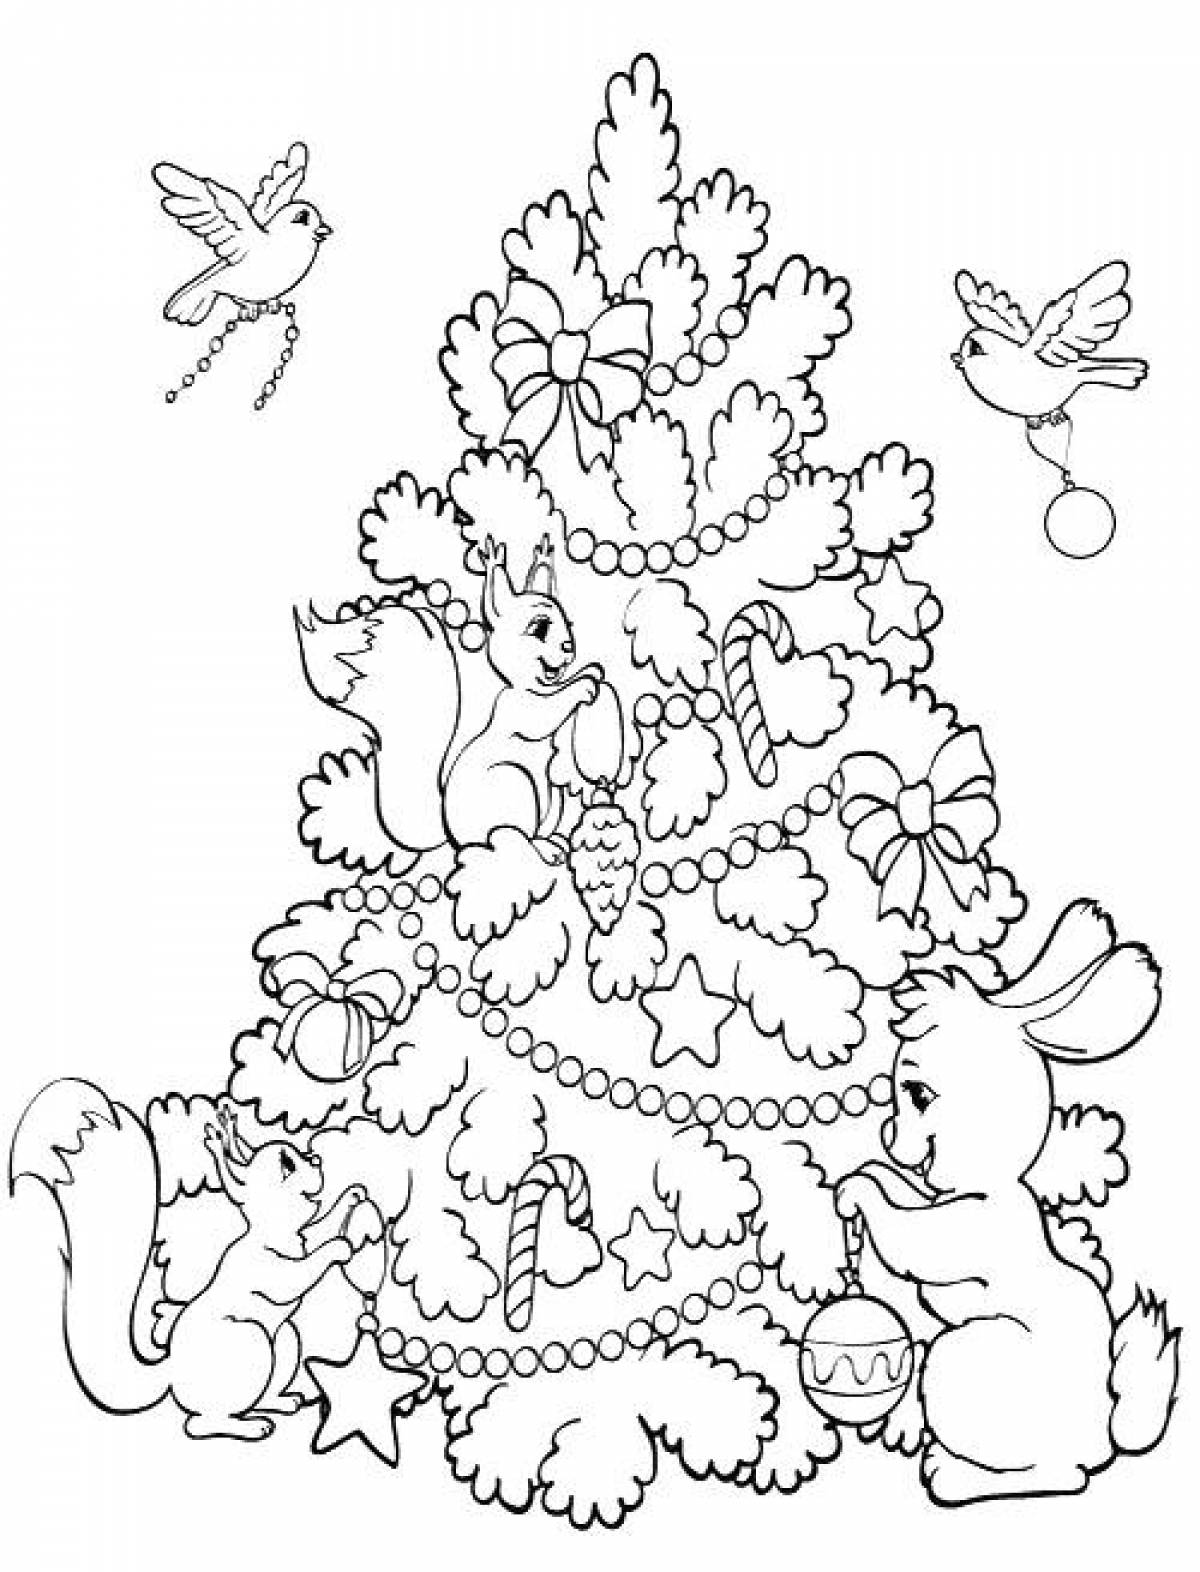 Glowing christmas tree coloring page